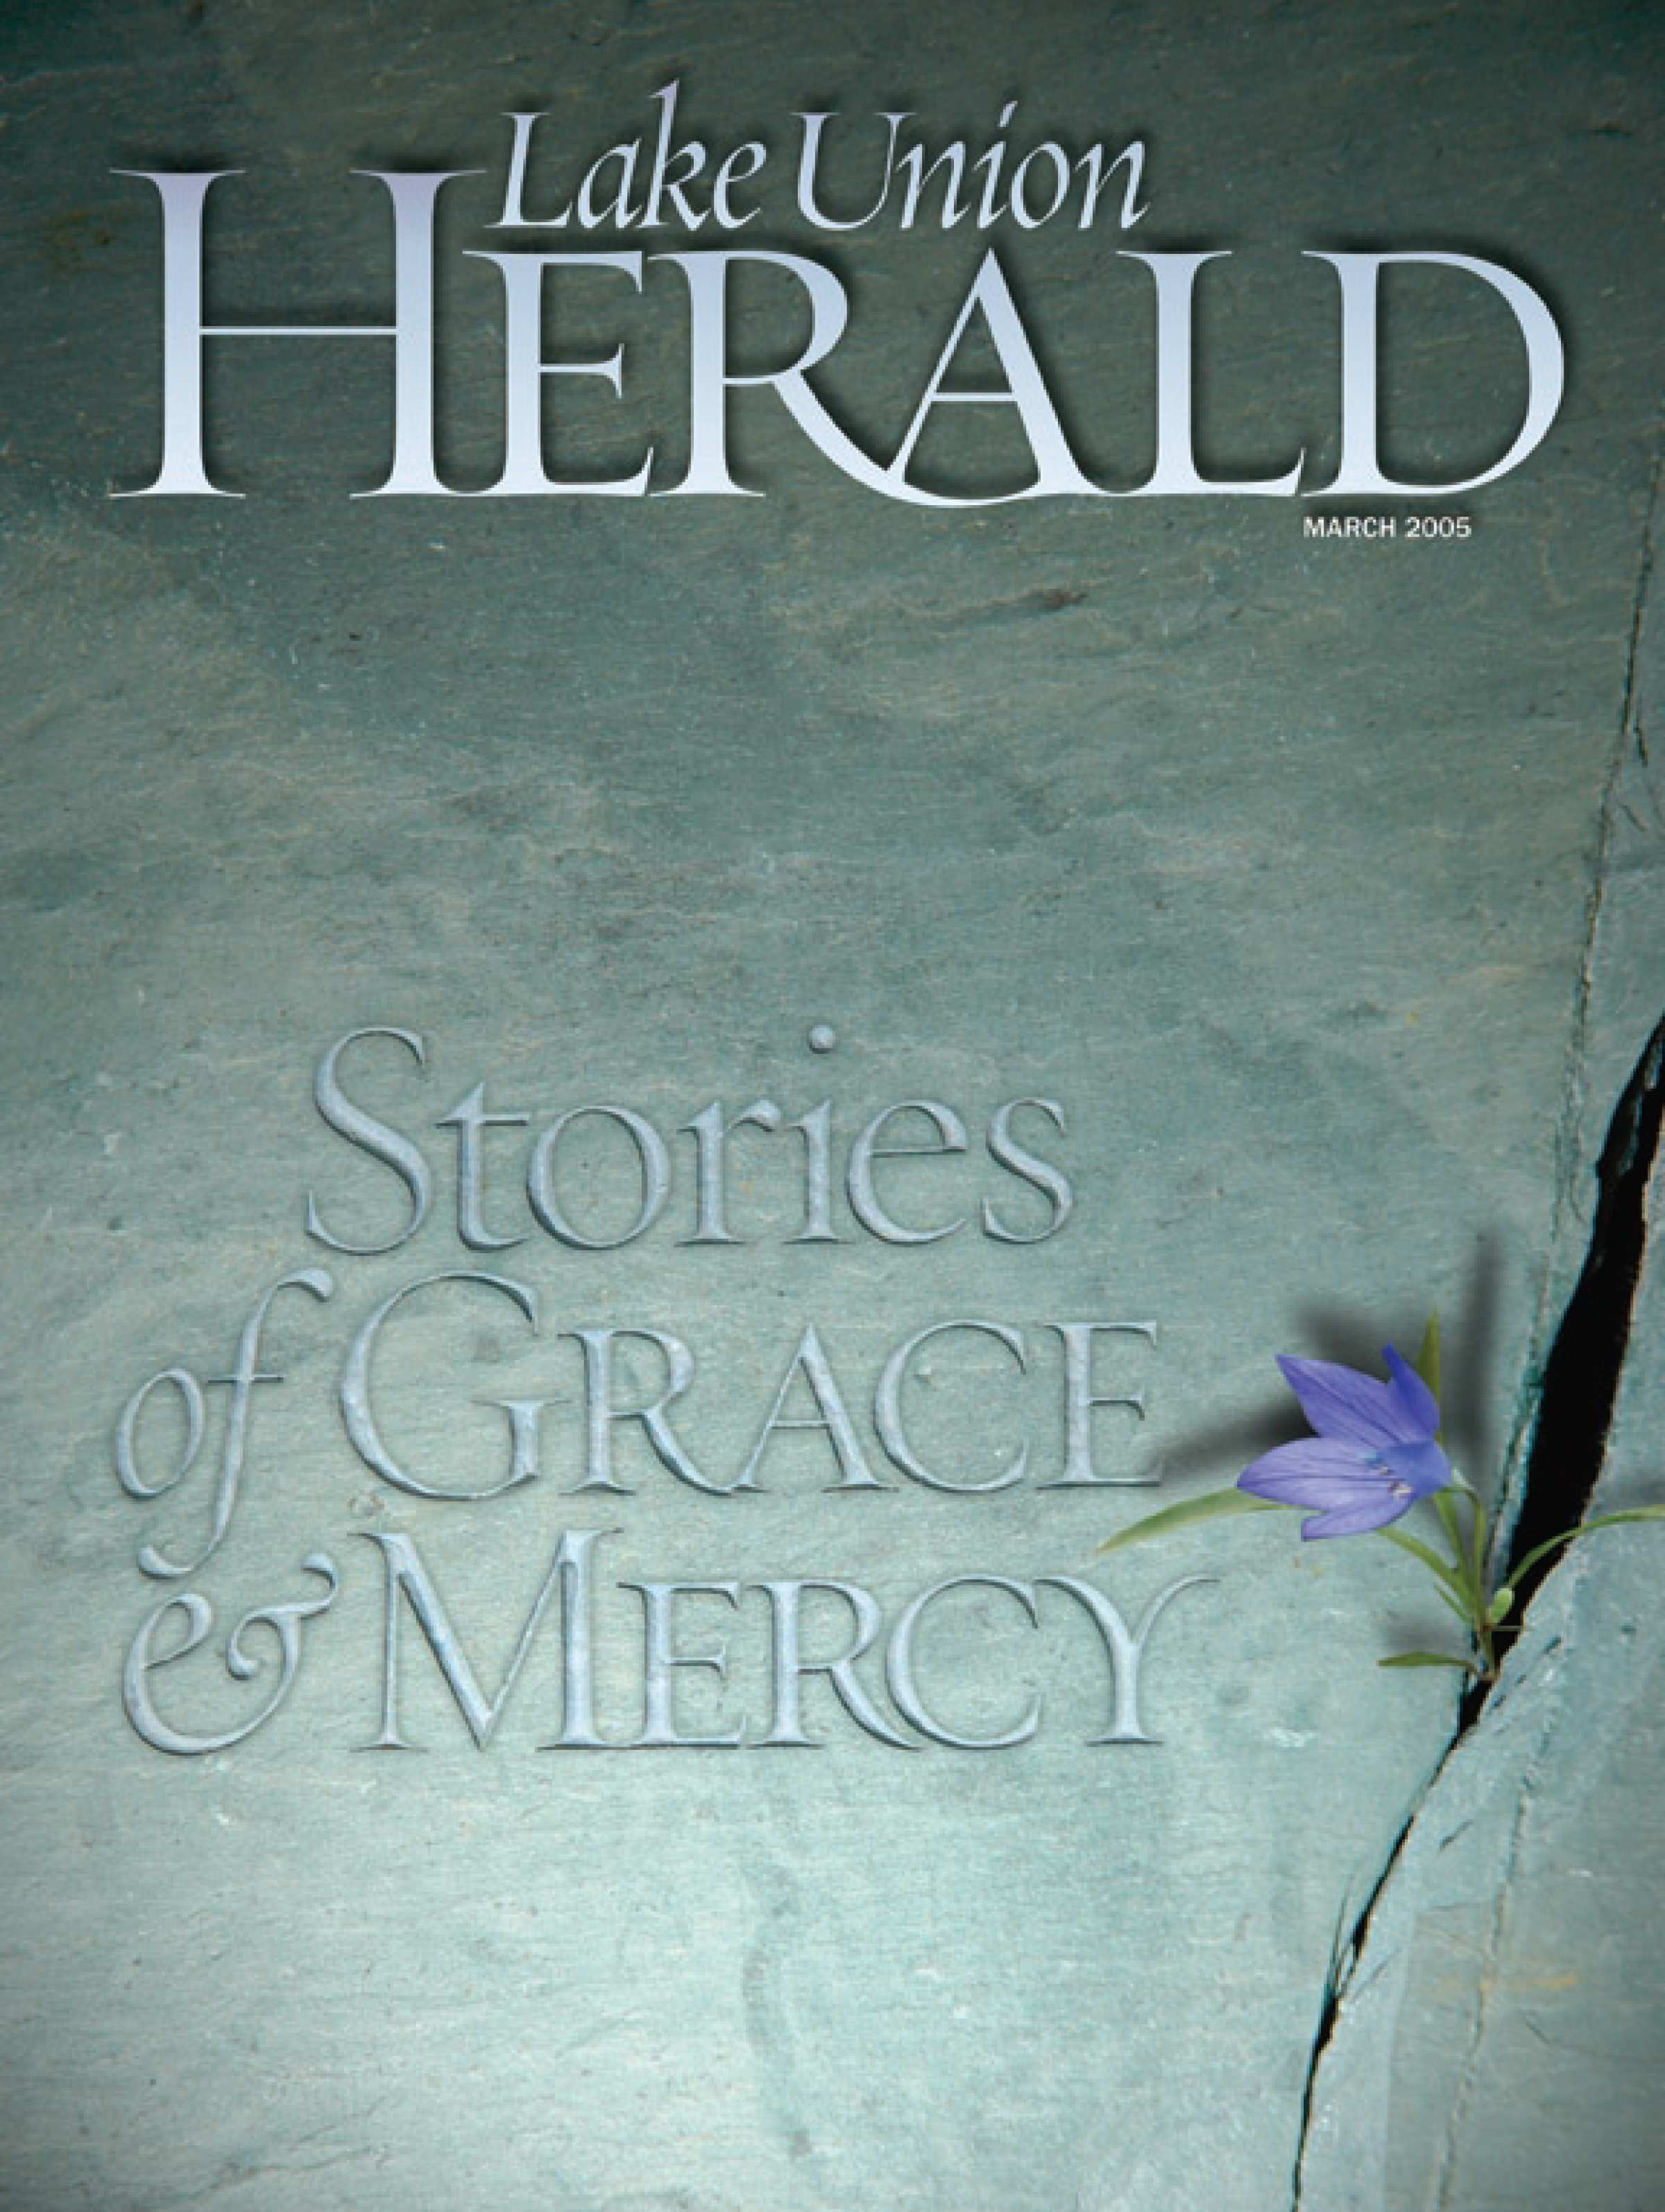 March 2005 Issue